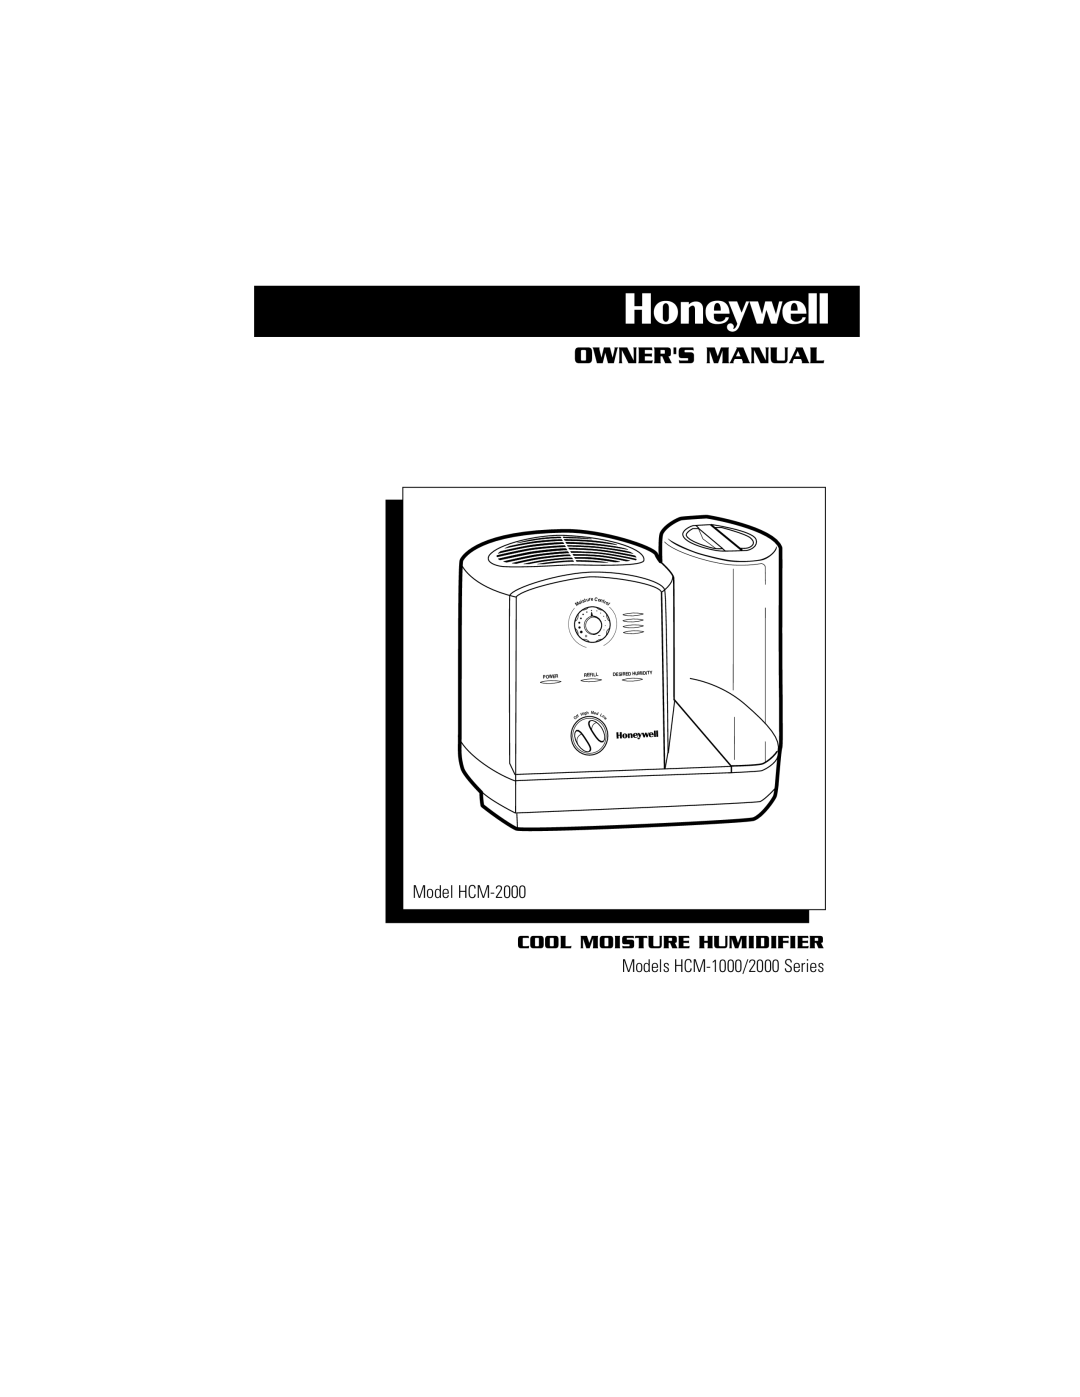 Honeywell HCM-2000 owner manual Cool Moisture Humidifier, Control, Power, Desired Humidity, Med L ow, Refill, High, ff O 